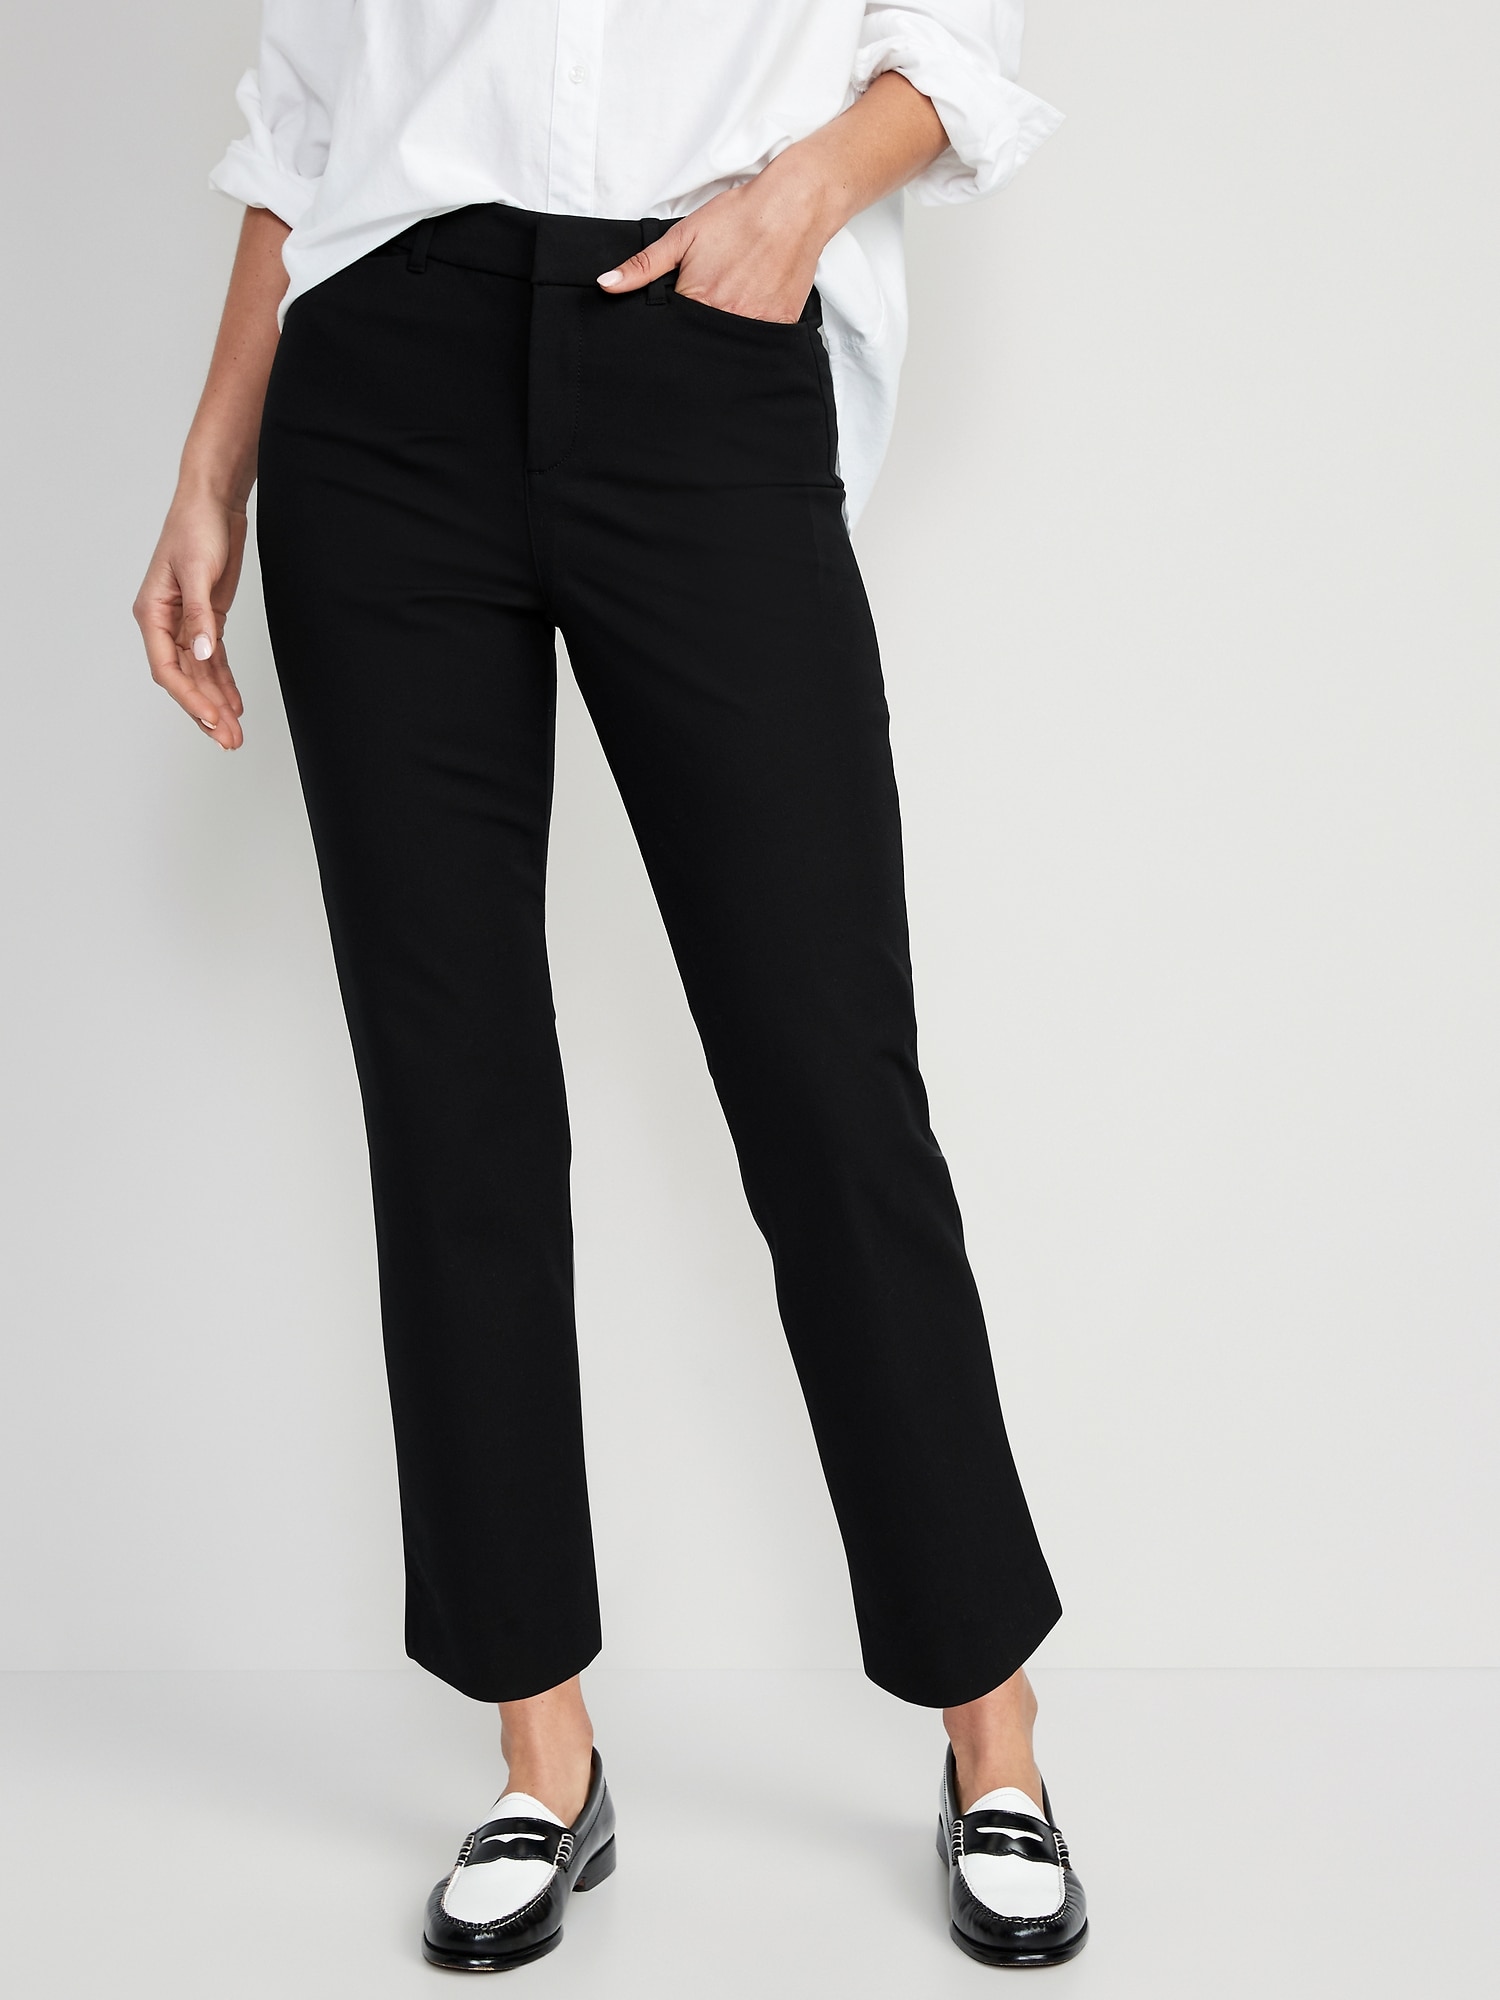 Ankle Work Pants For Women